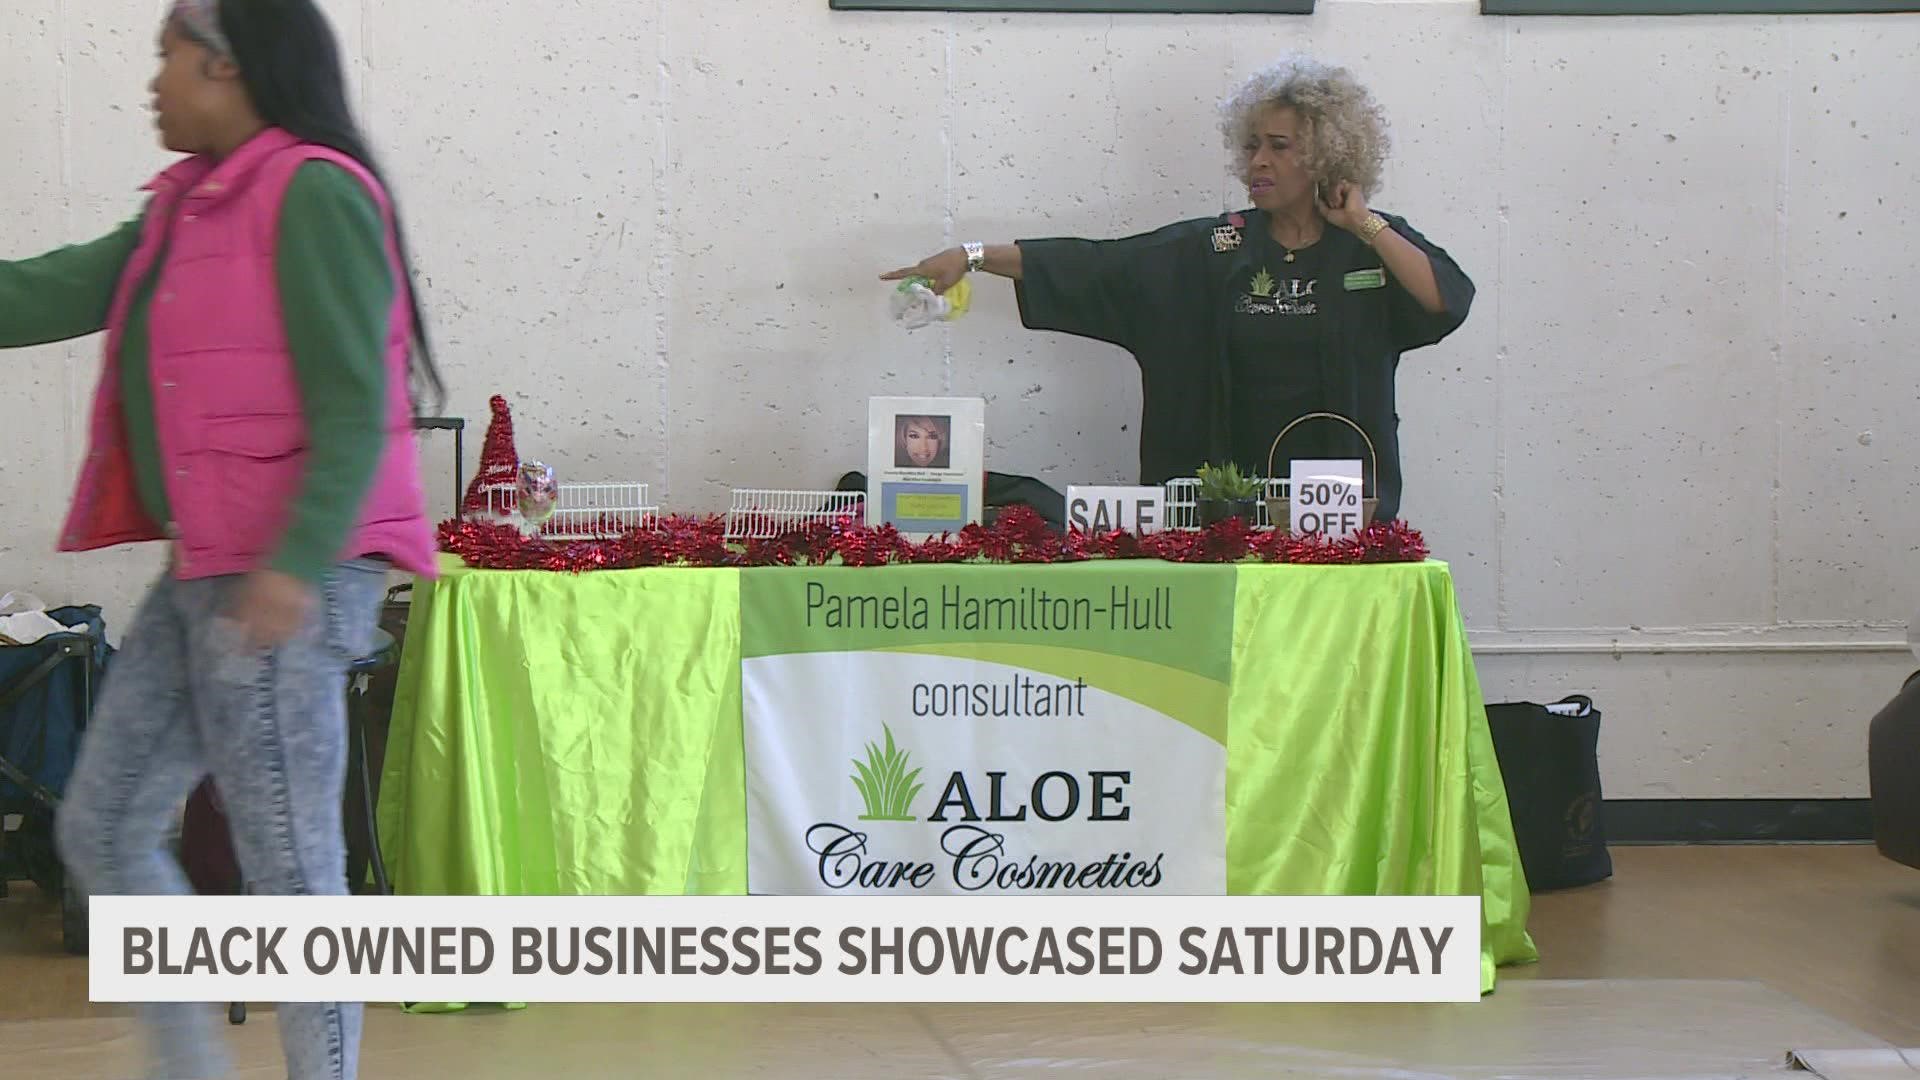 Today, Grand Rapids small businesses showcased hardworking business owners in a special expo.